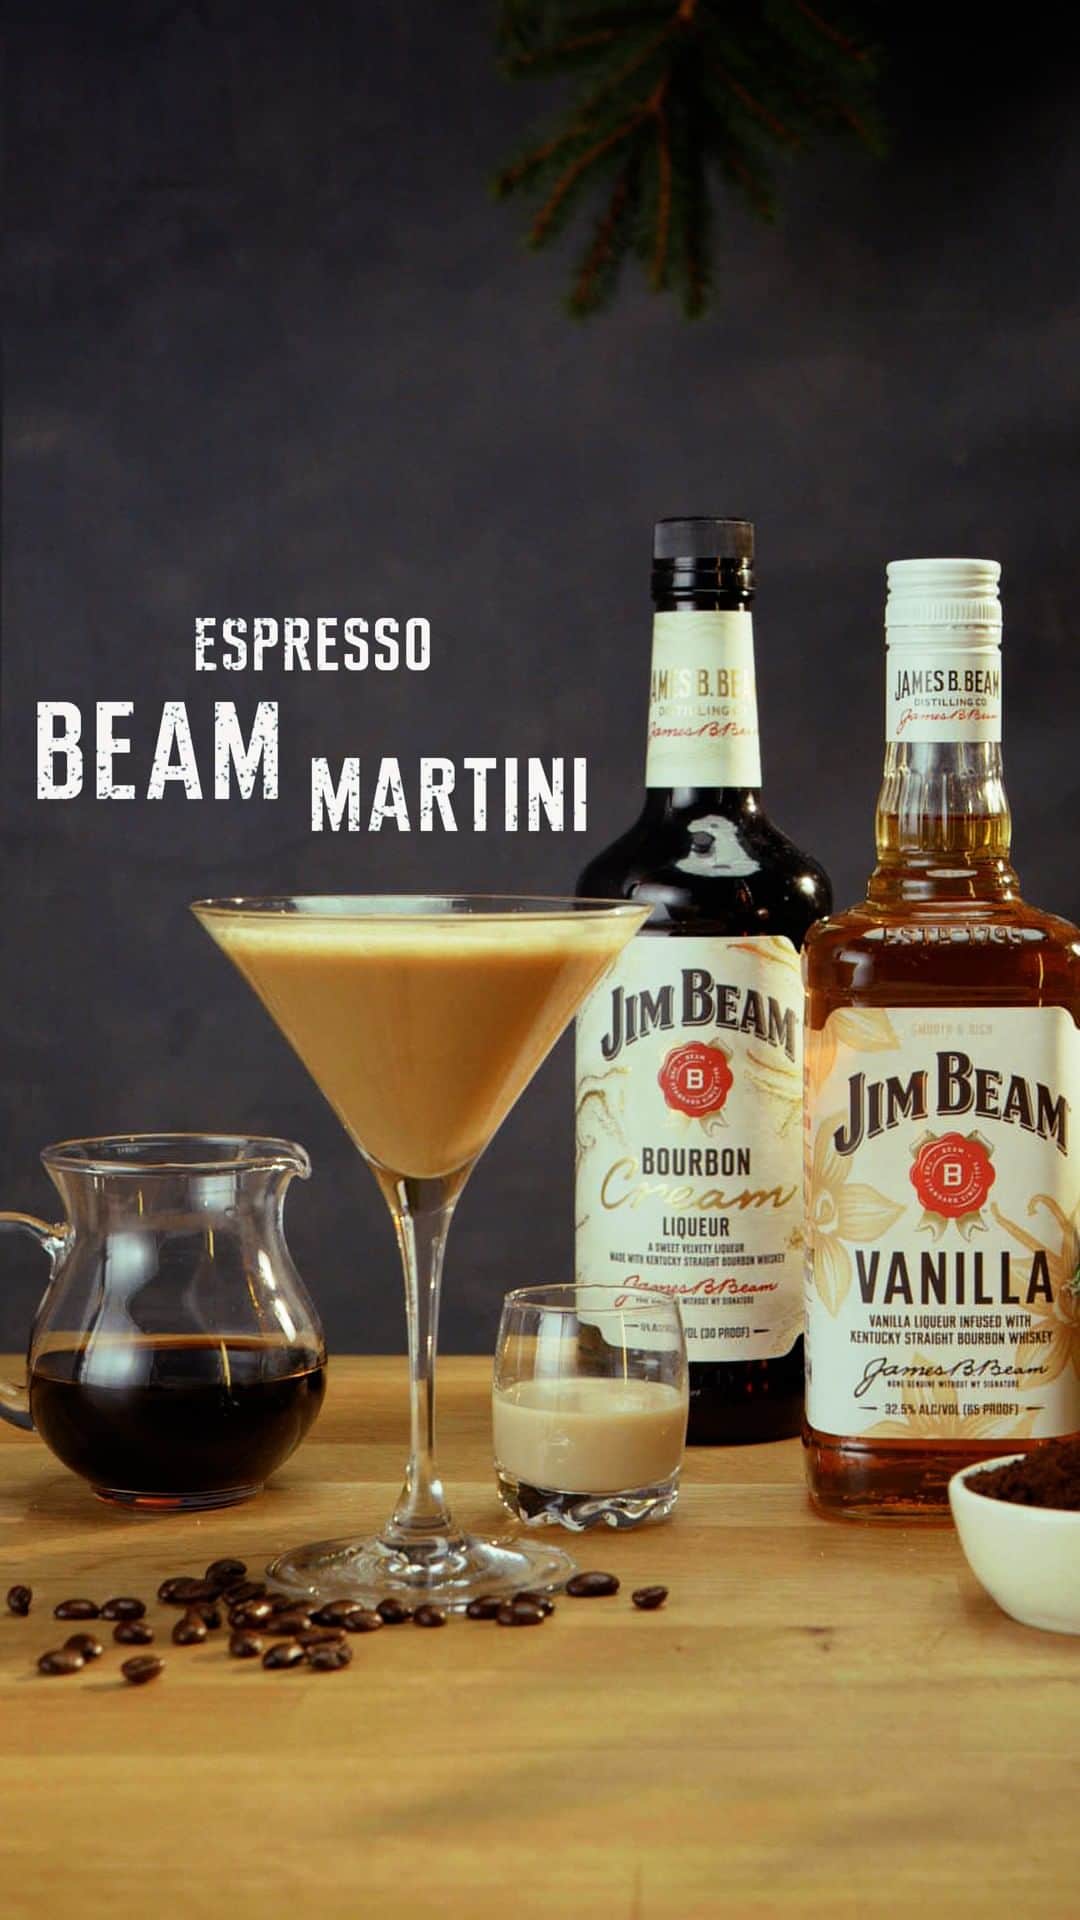 Jim Beamのインスタグラム：「Next level hosting. Our batched Espresso Beam Martini is pre-chilled and party ready.⁣ ___⁣ ⁣ Recipe:⁣ 12-13 Servings⁣ ⁣ 750ml Jim Beam® Vanilla⁣ Jim Beam® Bourbon Cream⁣ 3.5 tbsp of Instant Espresso Powder⁣ 8oz of Coffee Liqueur⁣ Water⁣ Espresso Beans⁣ ⁣ Pour out 10oz of Jim Beam® Vanilla and set aside for future use. Add 3.5 tablespoons of instant espresso powder. Add 8oz of coffee liqueur. Add 1oz of water. Shake and chill in freezer overnight. To serve, pour 2oz of mixture, 1 oz Jim Beam® Bourbon Cream, ice, and a splash of water into a cocktail shaker and shake. Strain into martini glass and garnish with three espresso beans.」